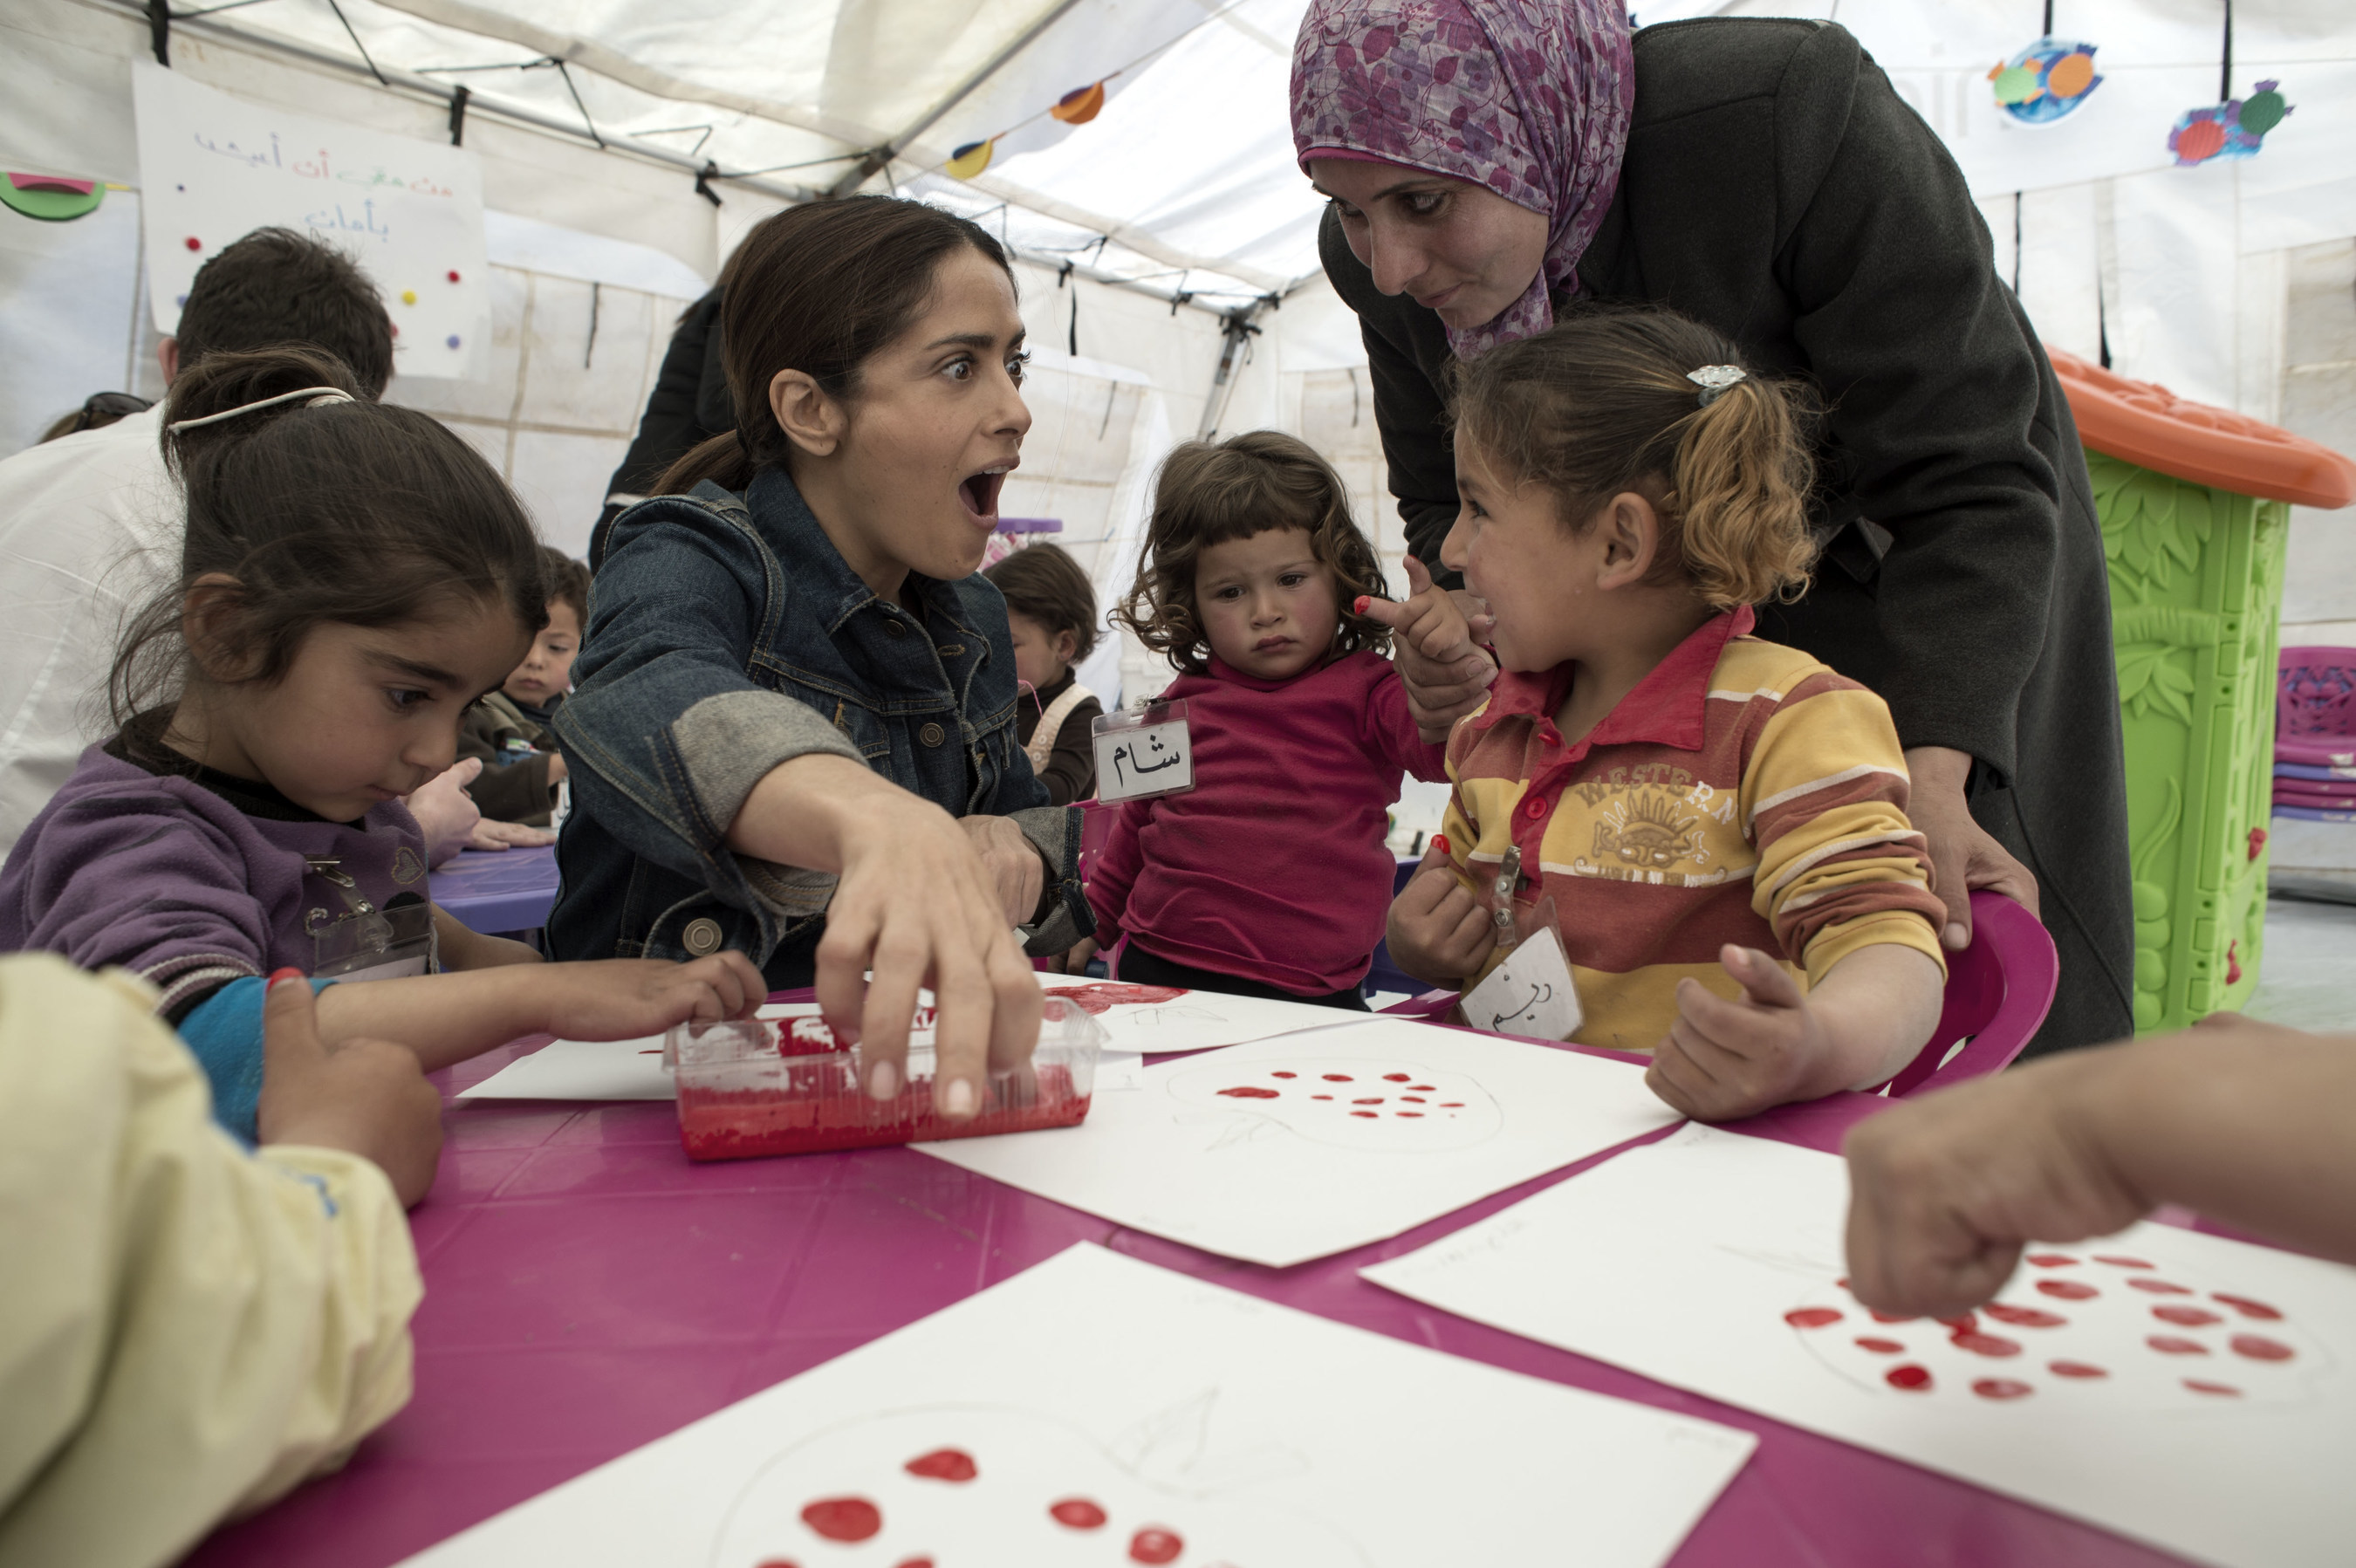 UNICEF supporter and CHIME FOR CHANGE campaign Co-Founder Salma Hayek meets with Syrian refugee children and aid workers who are providing a safe environment through counselling, play and learning activities. On April 25, Hayek visited Syrian refugees in Lebanon's Bekaa Valley with UNICEF to draw attention to the urgent humanitarian needs of children and families in the region, and to launch Gucci's CHIME for the Children of Syria fundraising appeal.